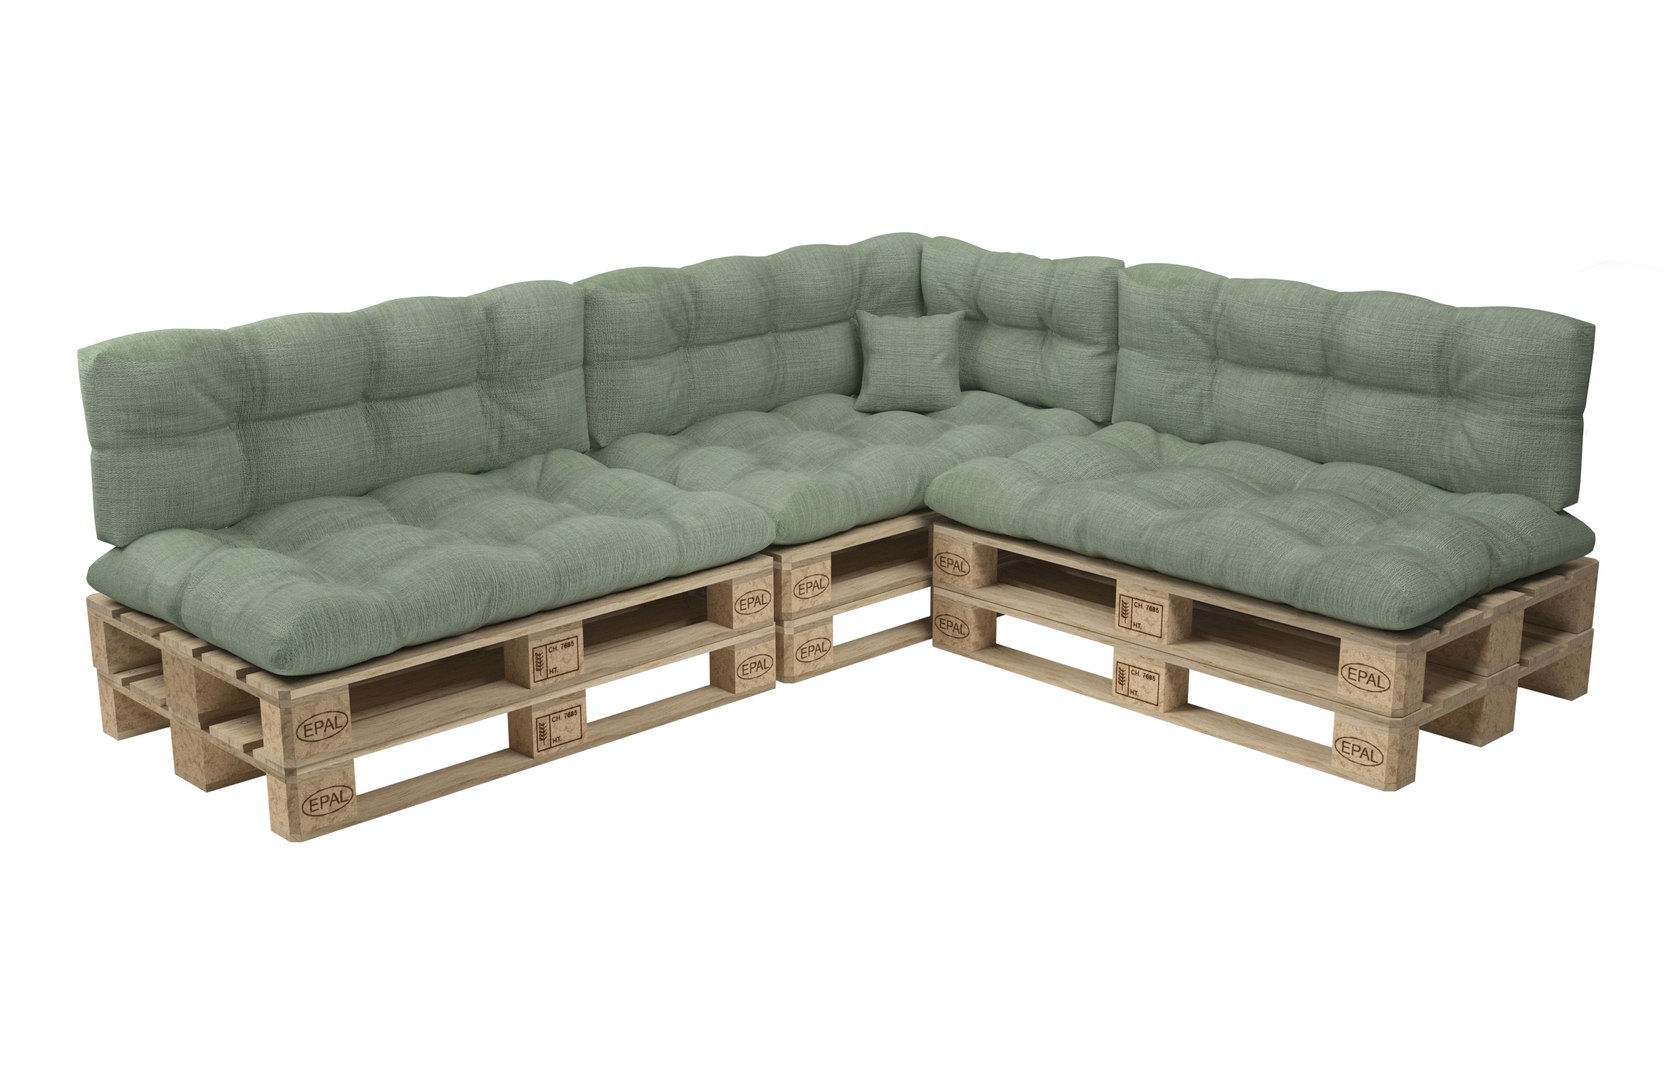 3D Corner Sofa With Pallets And Quilted Pillows - Pallet Furniture Model -  TurboSquid 1813440